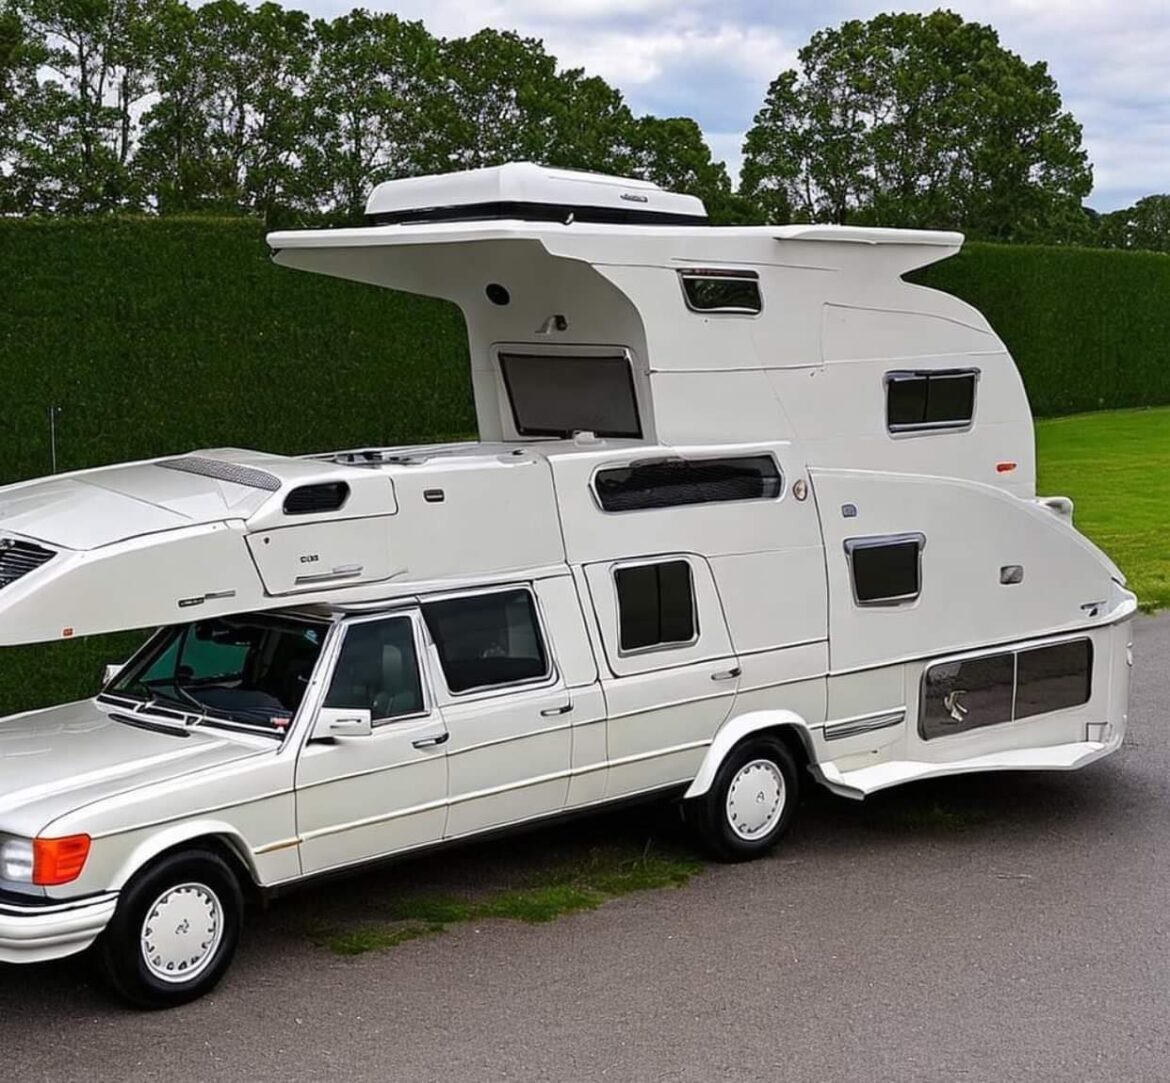 If Liberals Formed a Committee to Design an RV